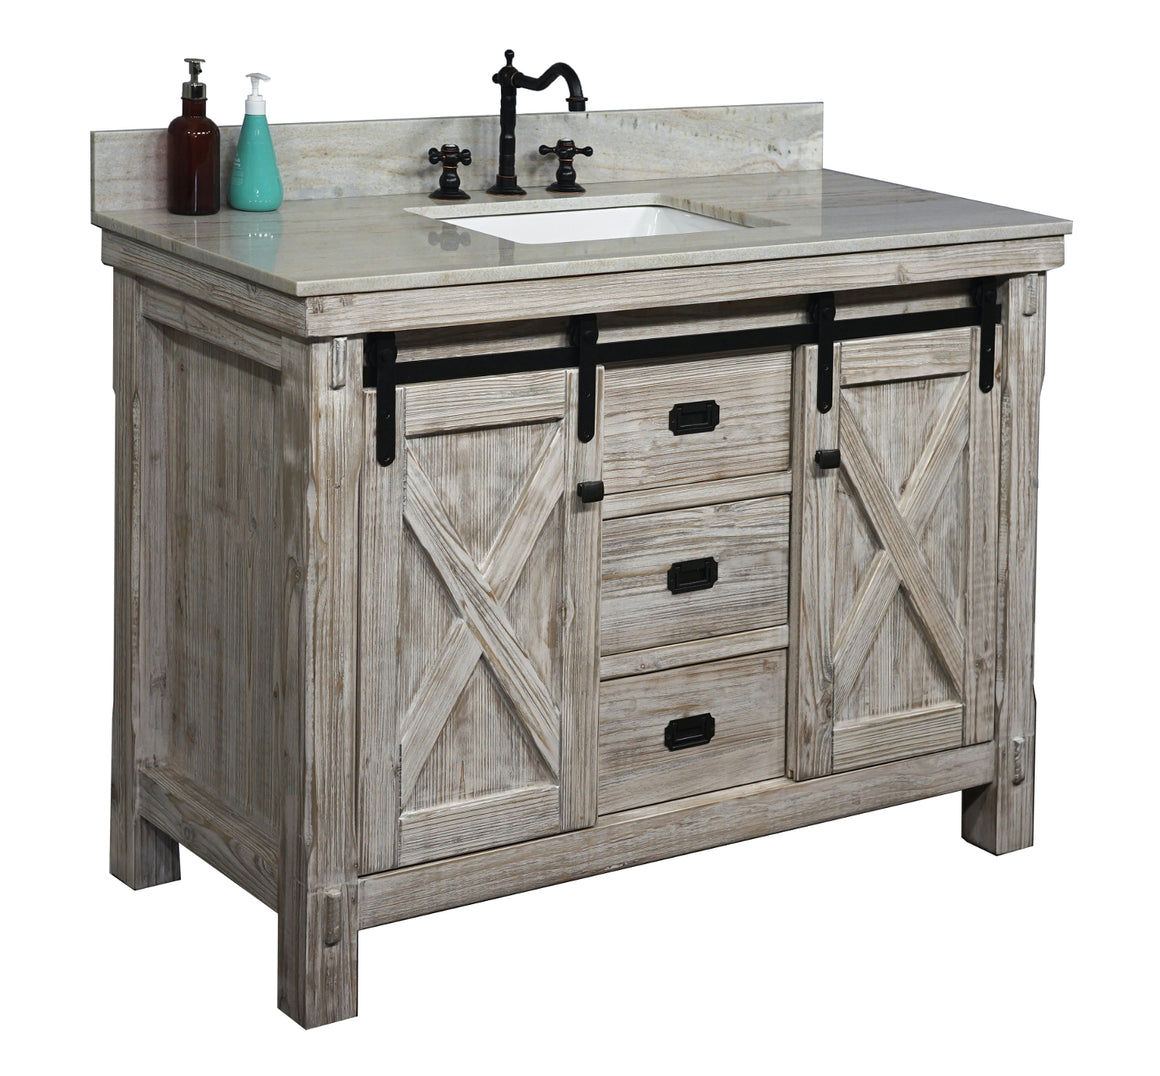 48"RUSTIC SOLID FIR BARN DOOR STYLE SINGLE SINK VANITY IN WHITE WASH WITH COASTAL SANDS MARBLE TOP WITH RECTANGULAR SINK-NO FAUCET